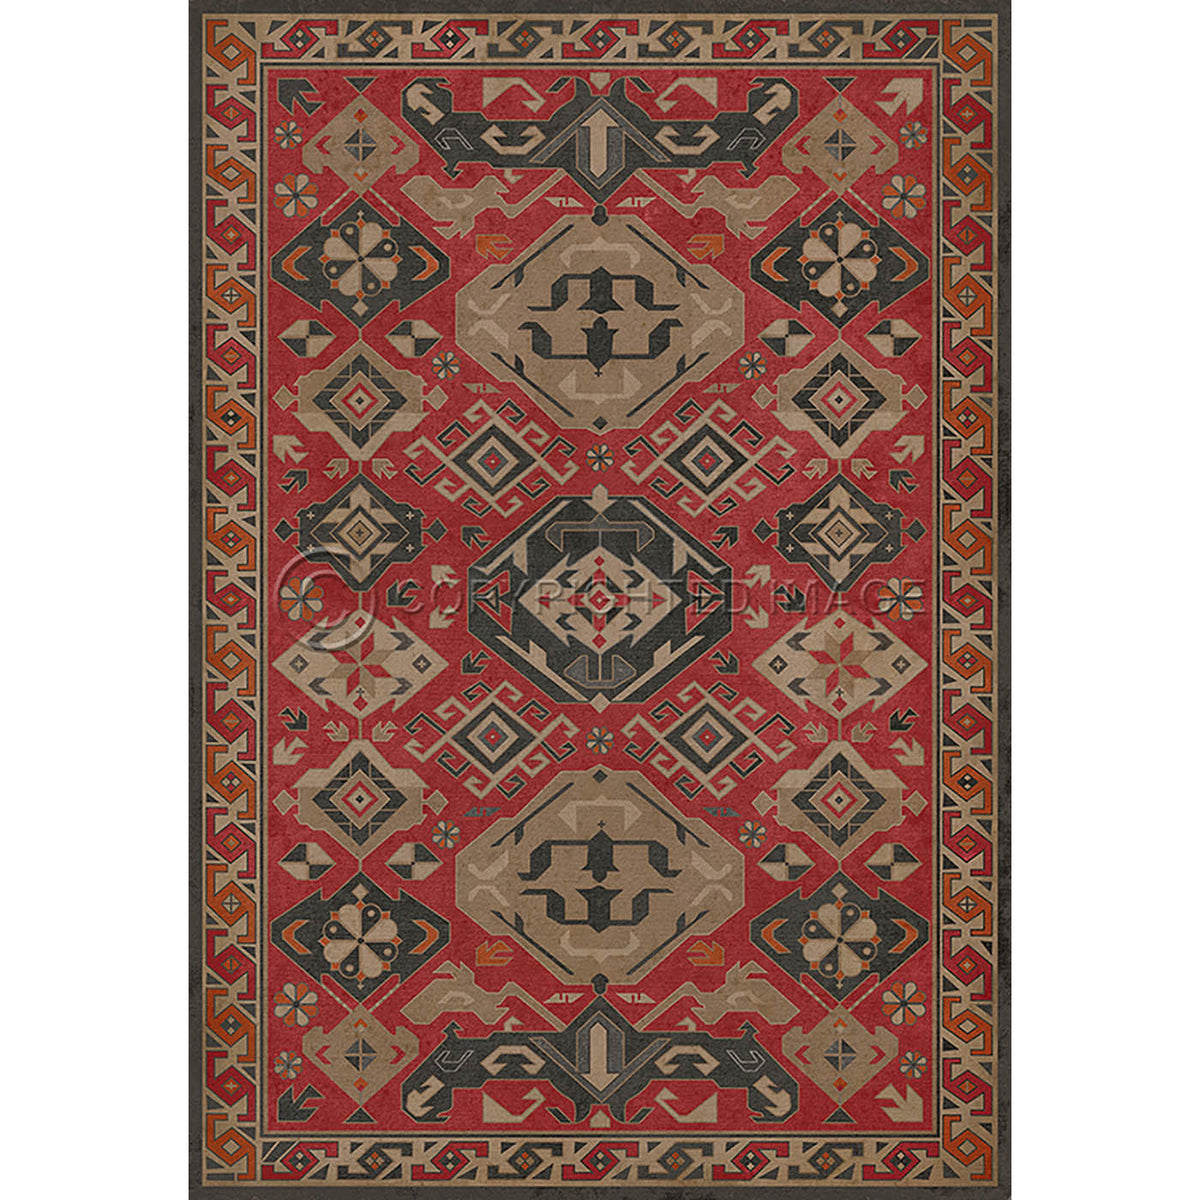 Traditional All Spice 70x102